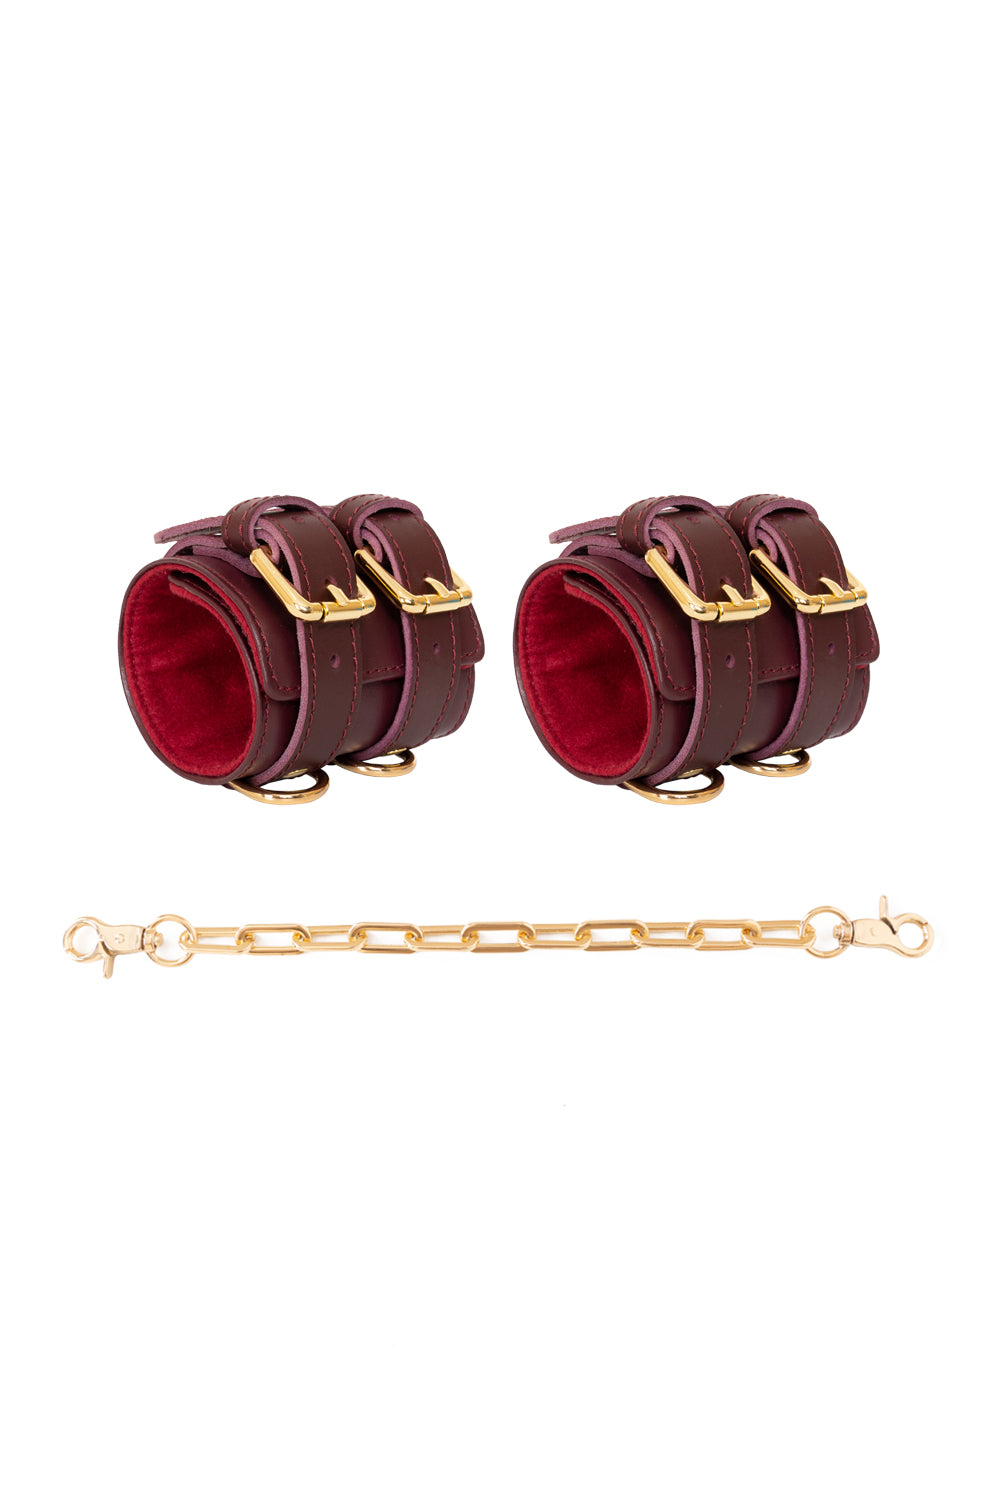 Hand, Ankle cuffs Wide with chain connectors.